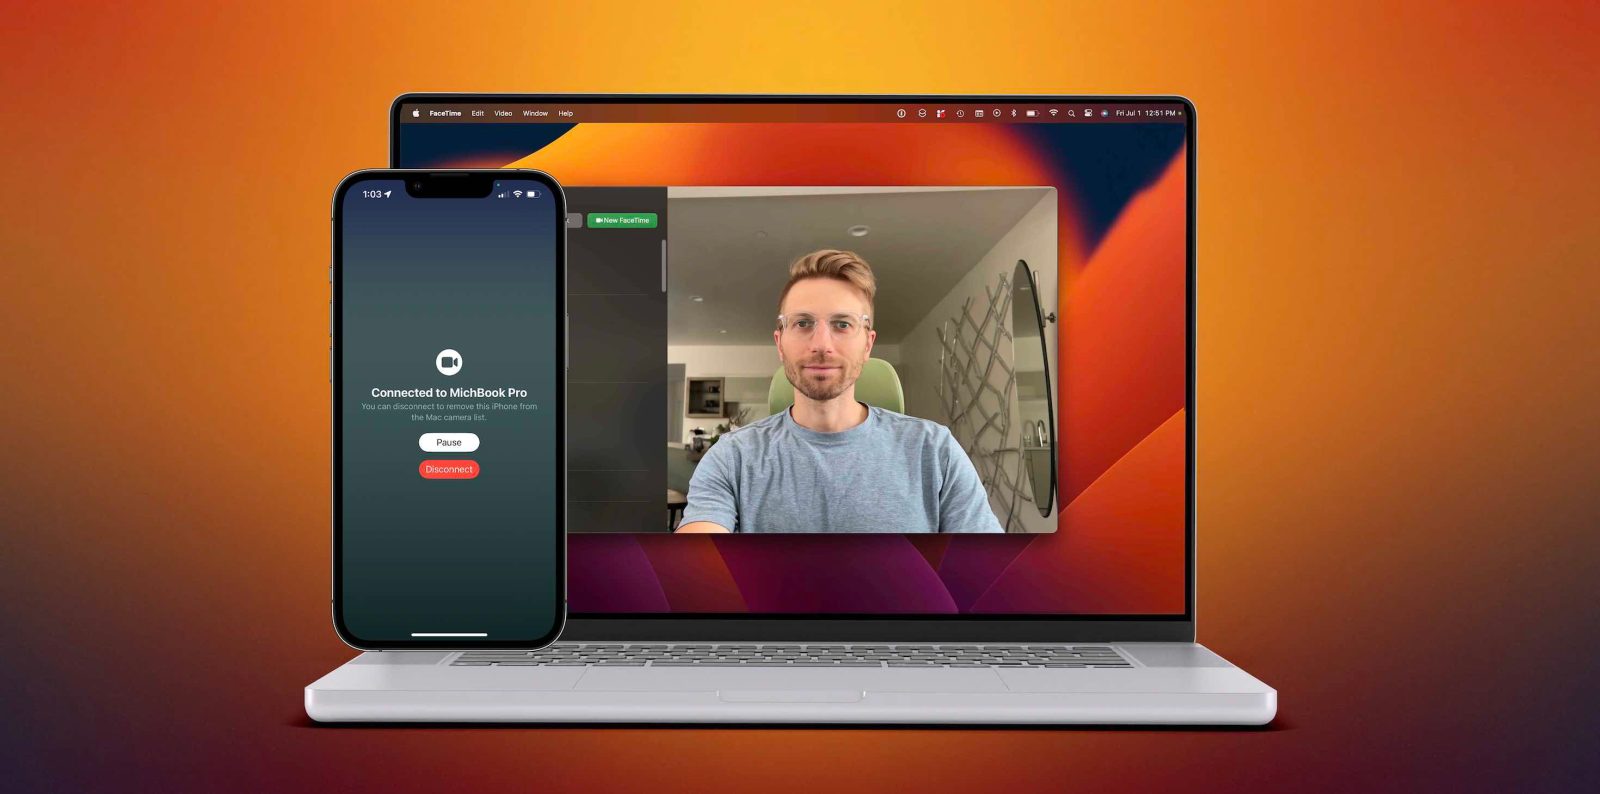 iPhone as Mac webcam: How to use Continuity Camera in iOS 16 and macOS Ventura [Video]